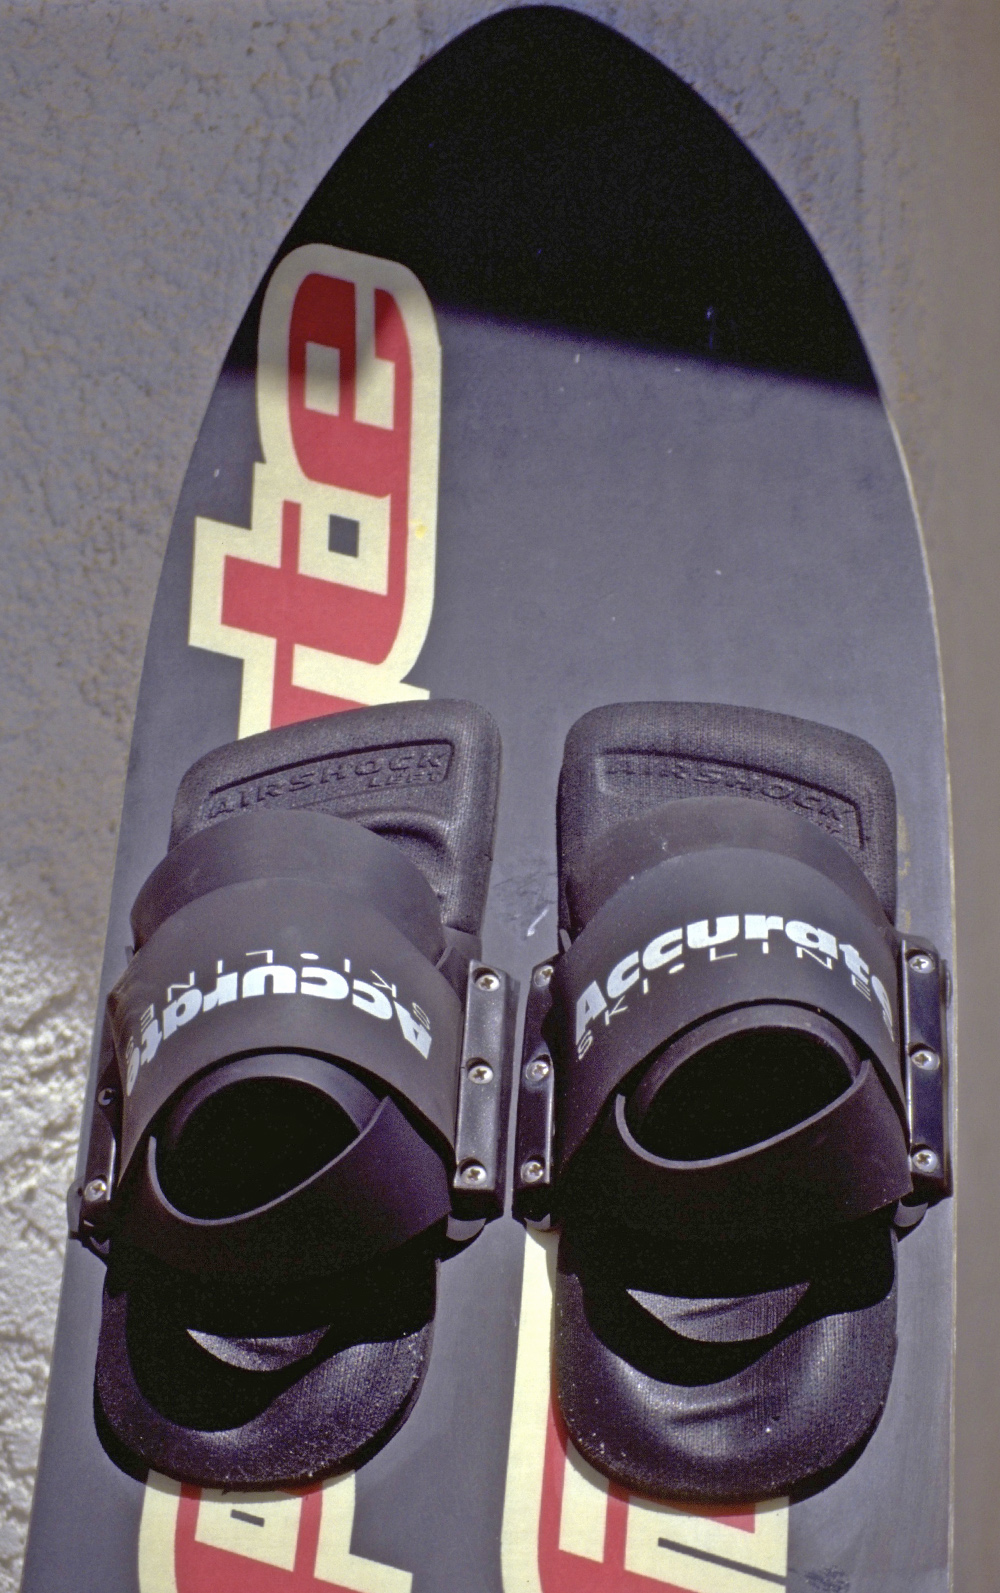 adventures-water-skiing-hydrofoiling-1997-air-shock-foot-pads